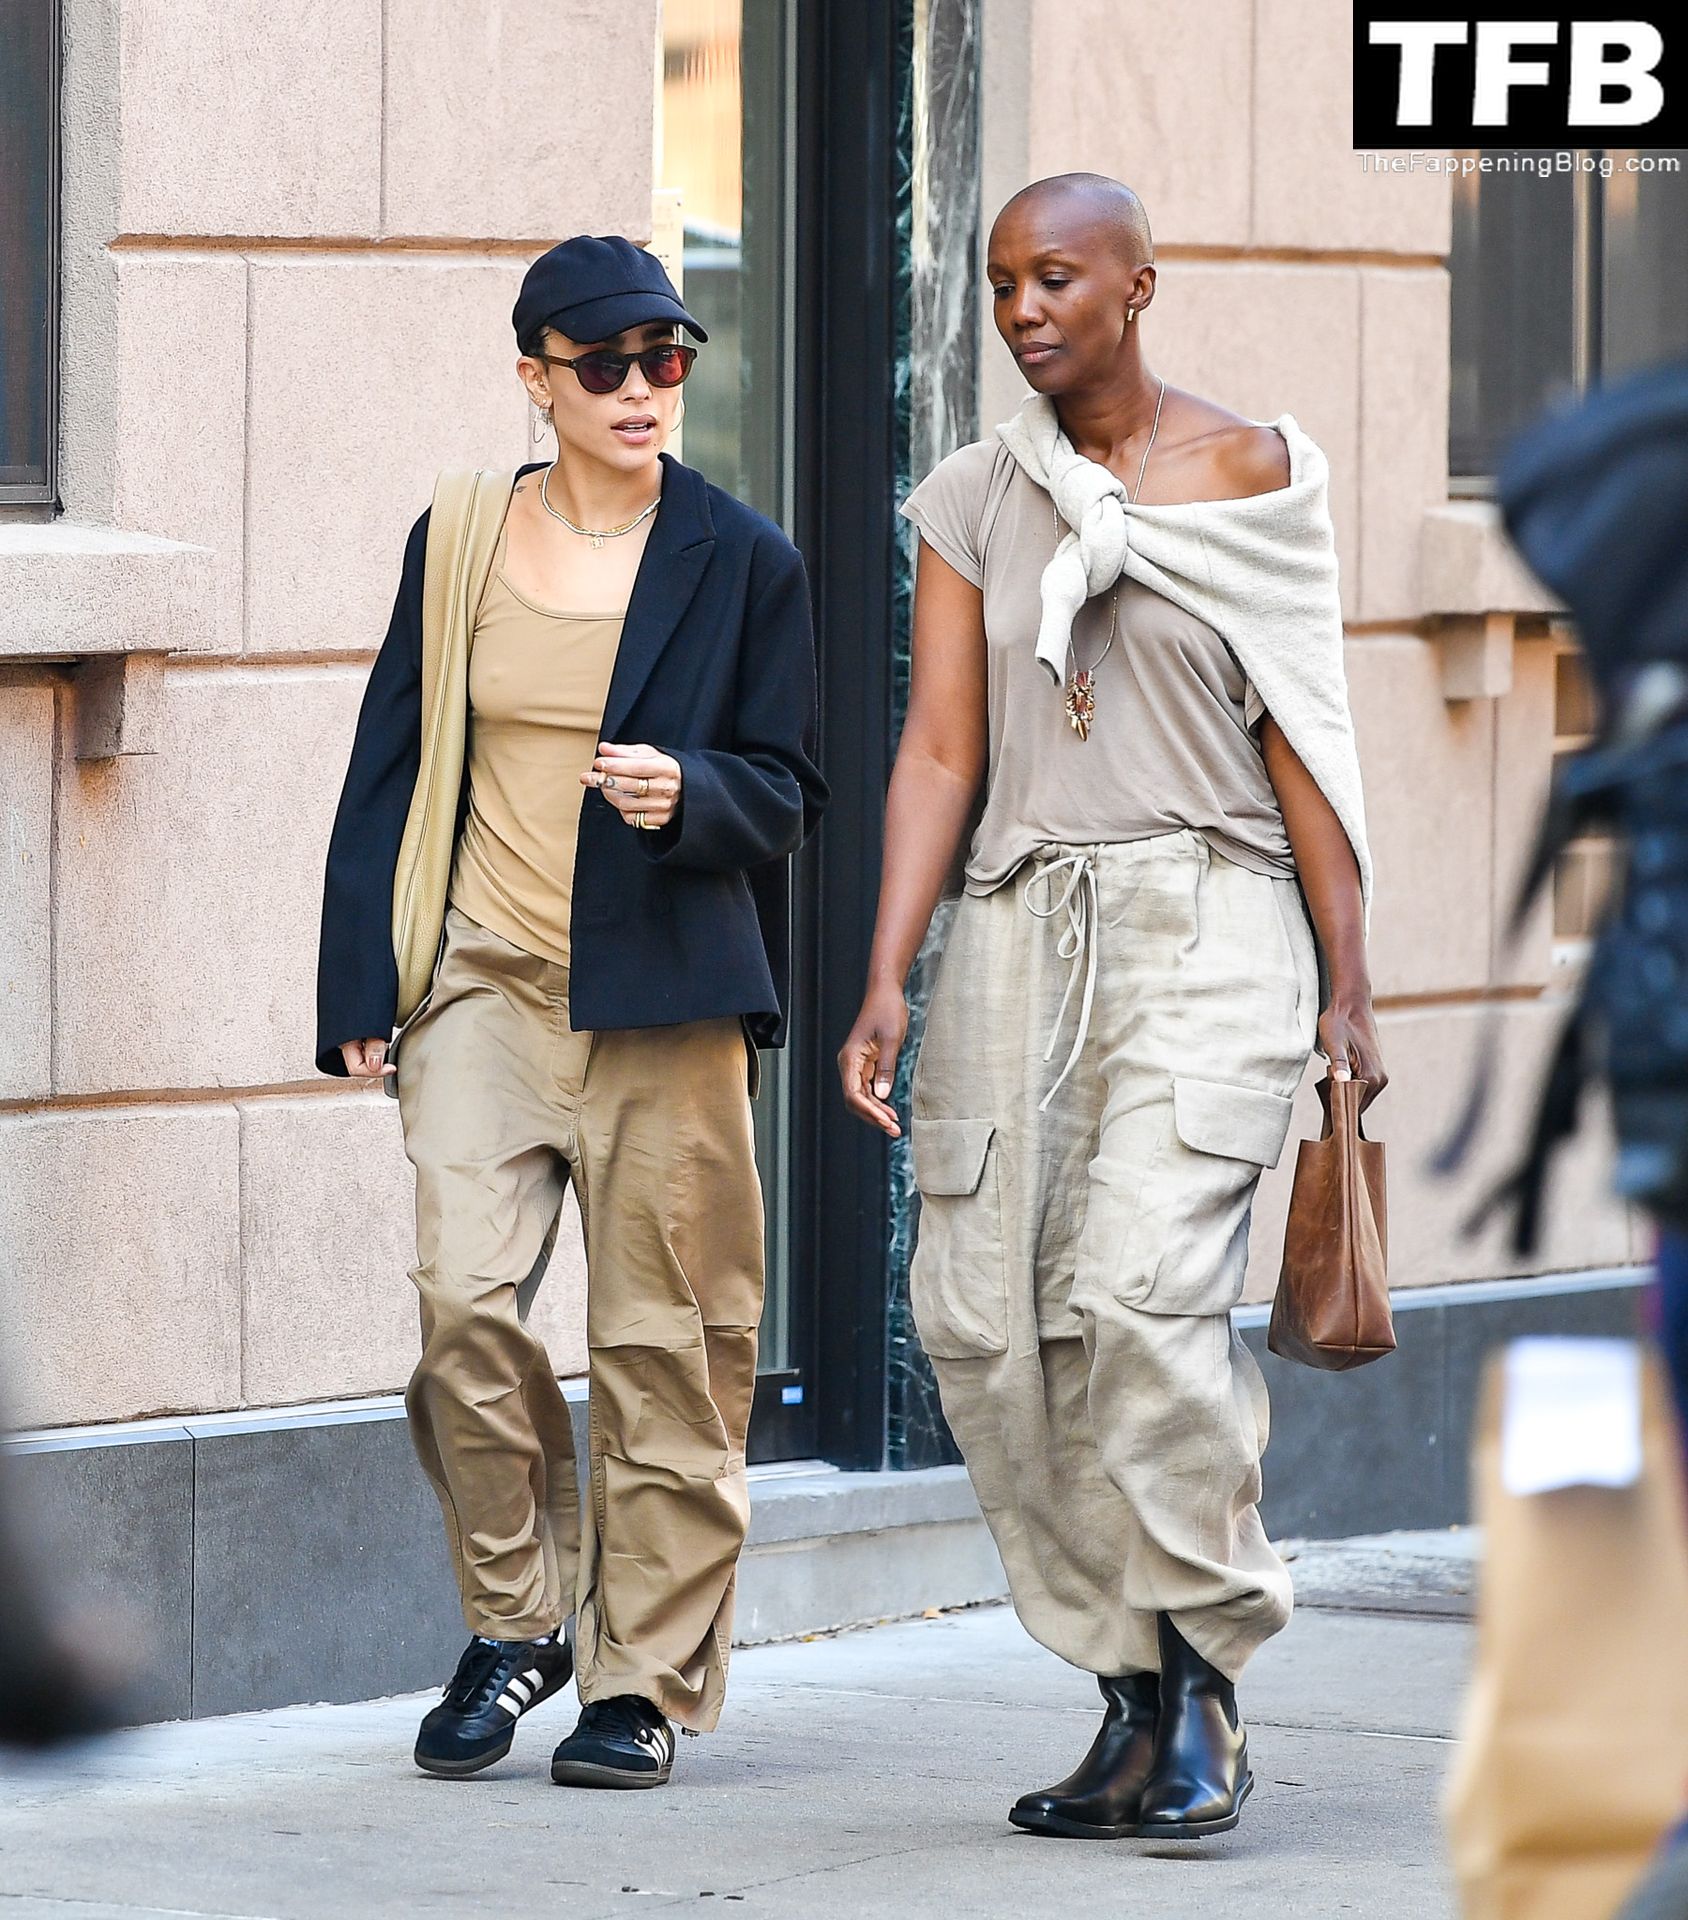 Zoe Kravitz Sexy Tits The Fappening Blog 6 - Braless Zoe Kravitz Steps Out With a Friend in NYC (13 Photos)